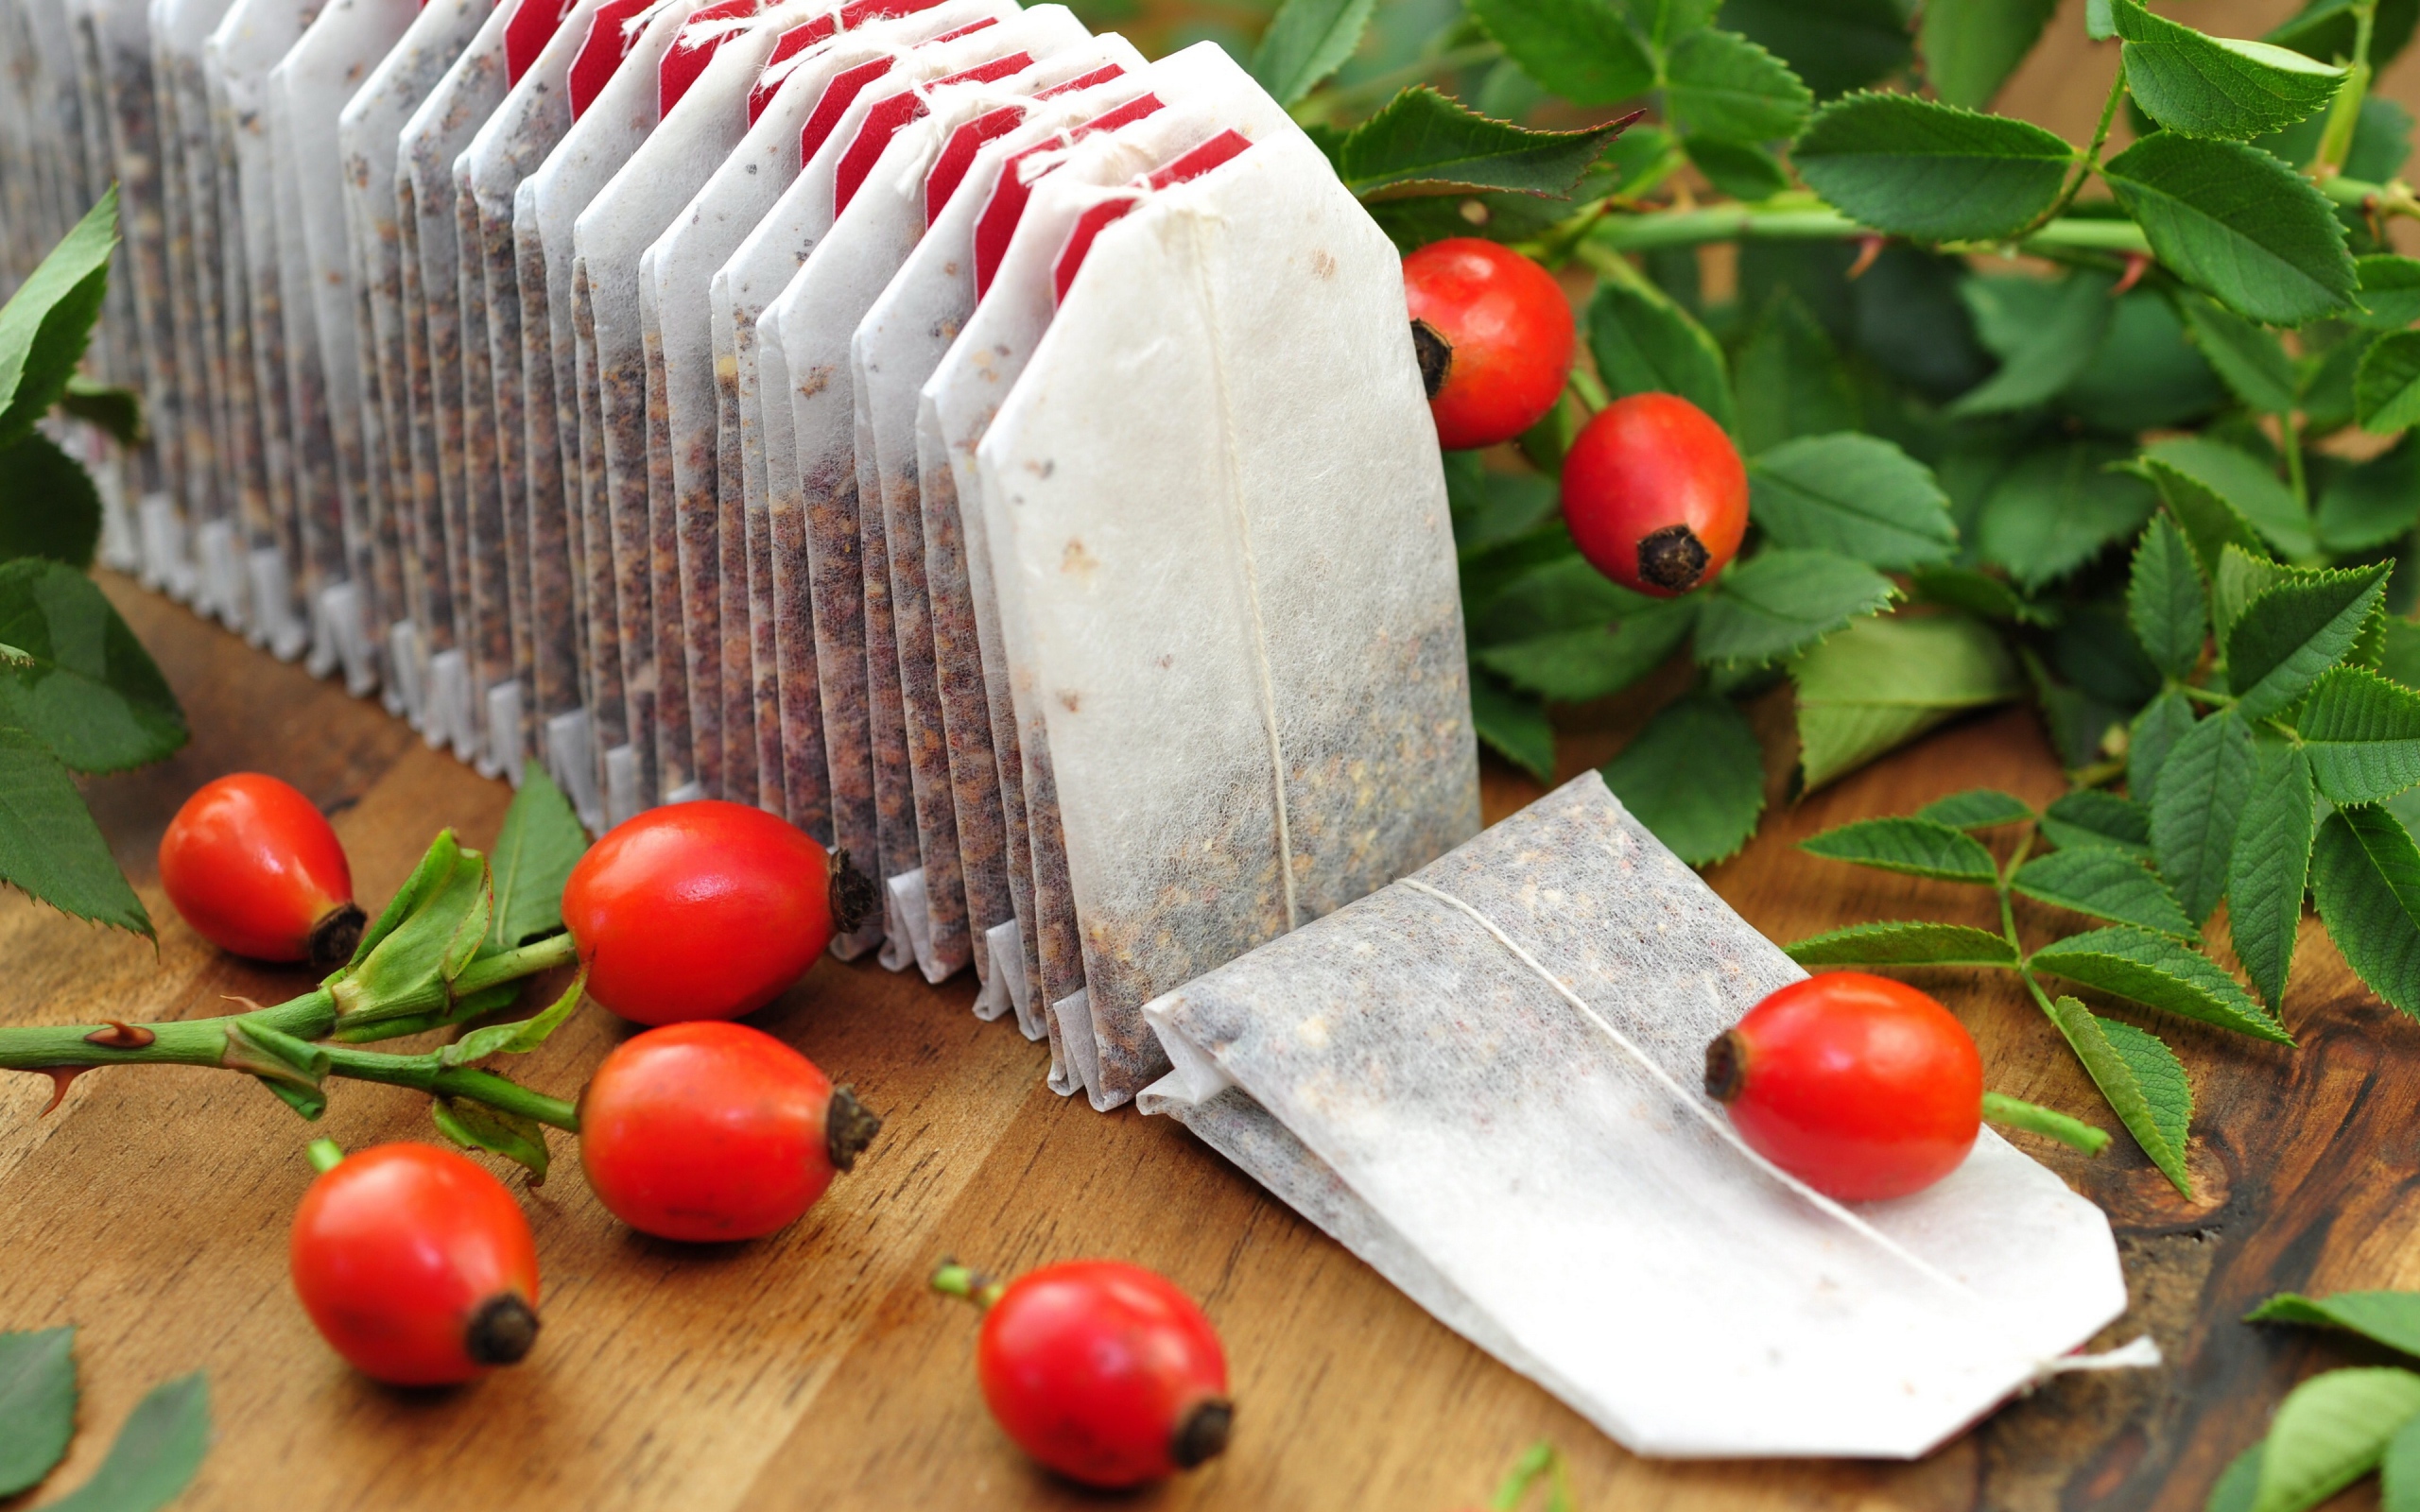 Tea bags on the table with wild rose berries